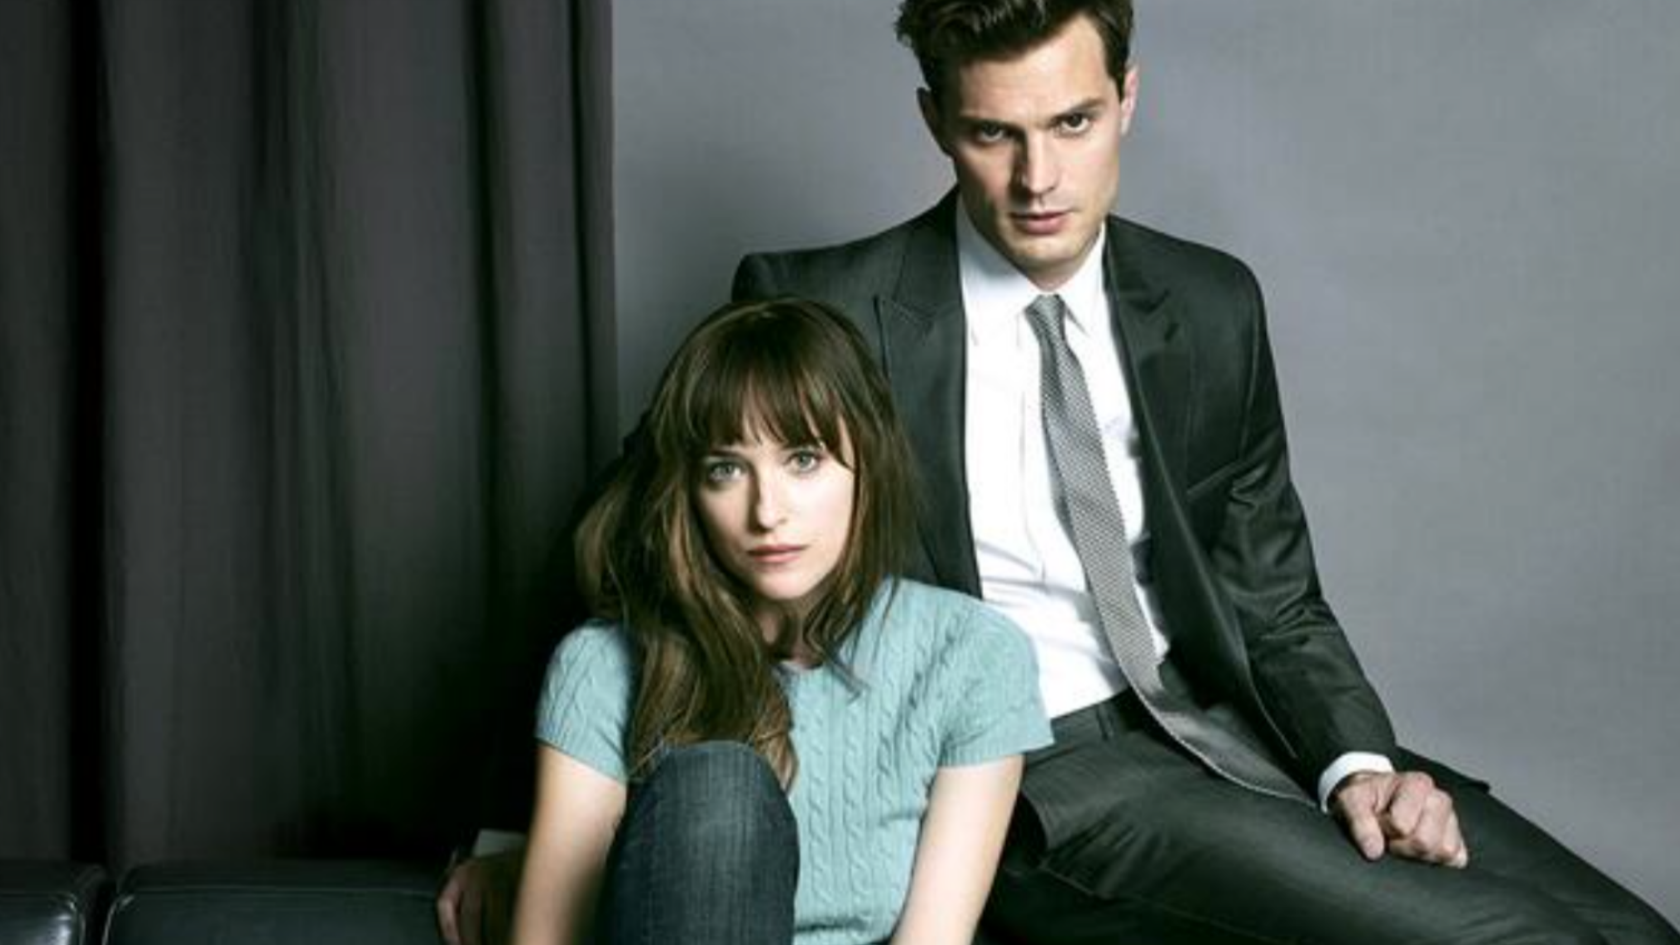 50 shades movie review